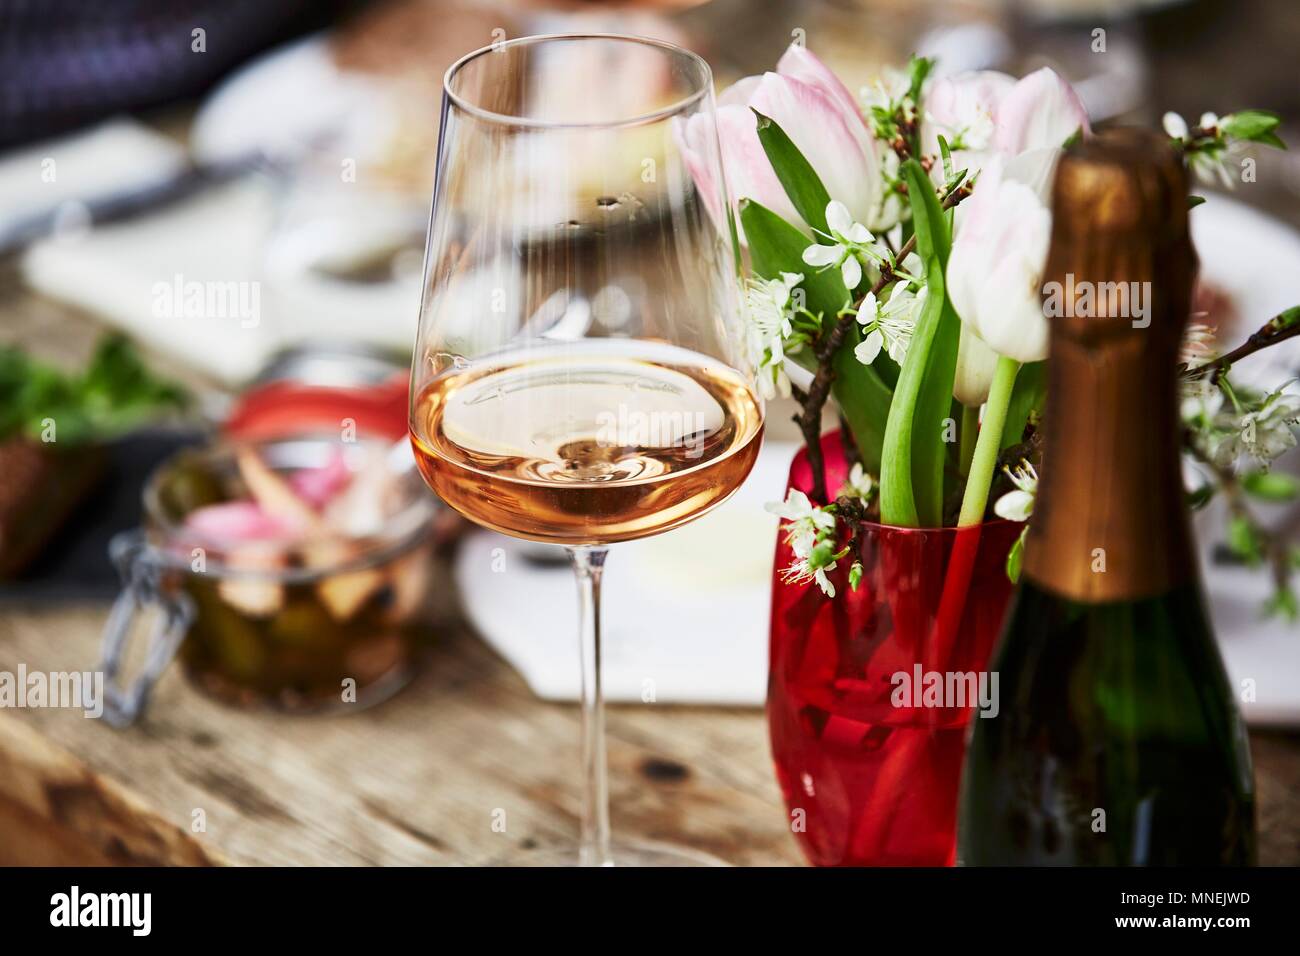 A glass of rosé champagne, a bunch of spring flowers and a bottle of champagne on a wooden table Stock Photo